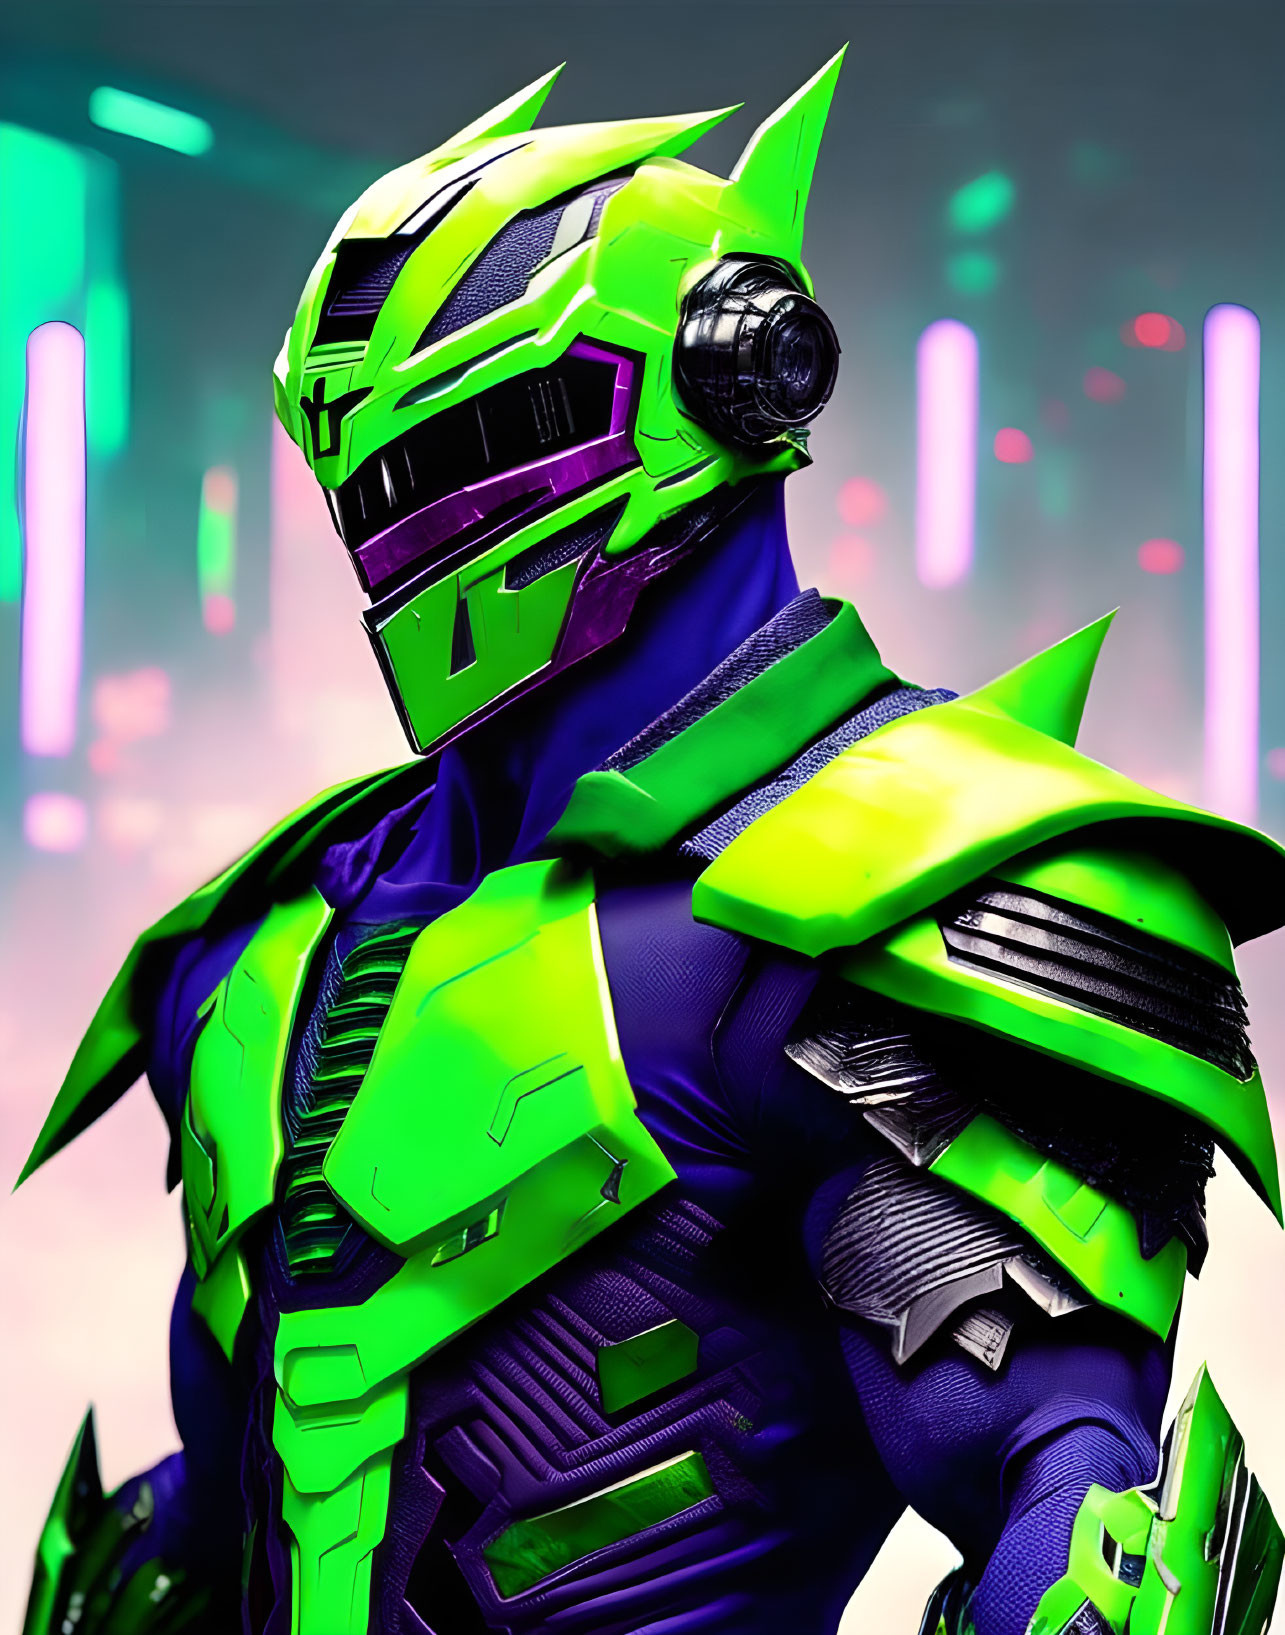 Futuristic figure in green and blue armor with intricate visor on neon-lit background